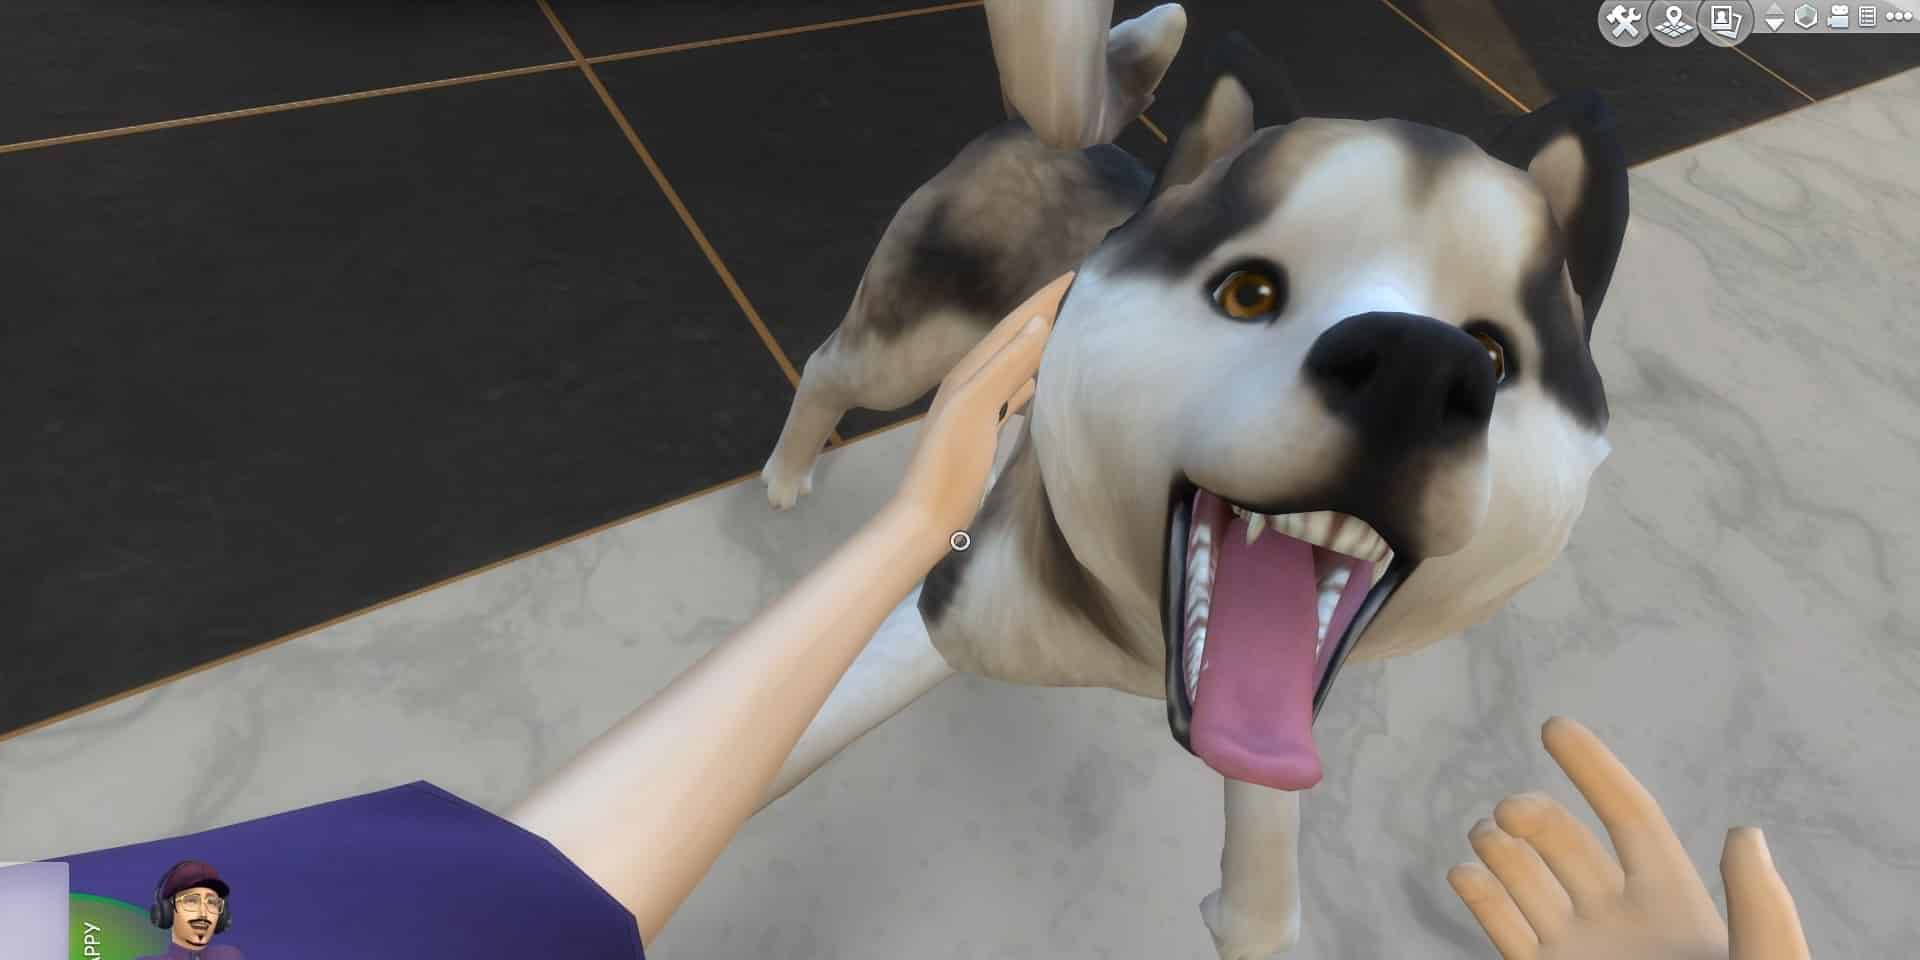 A Sim pets a dog in first-person gameplay in The Sims 4.